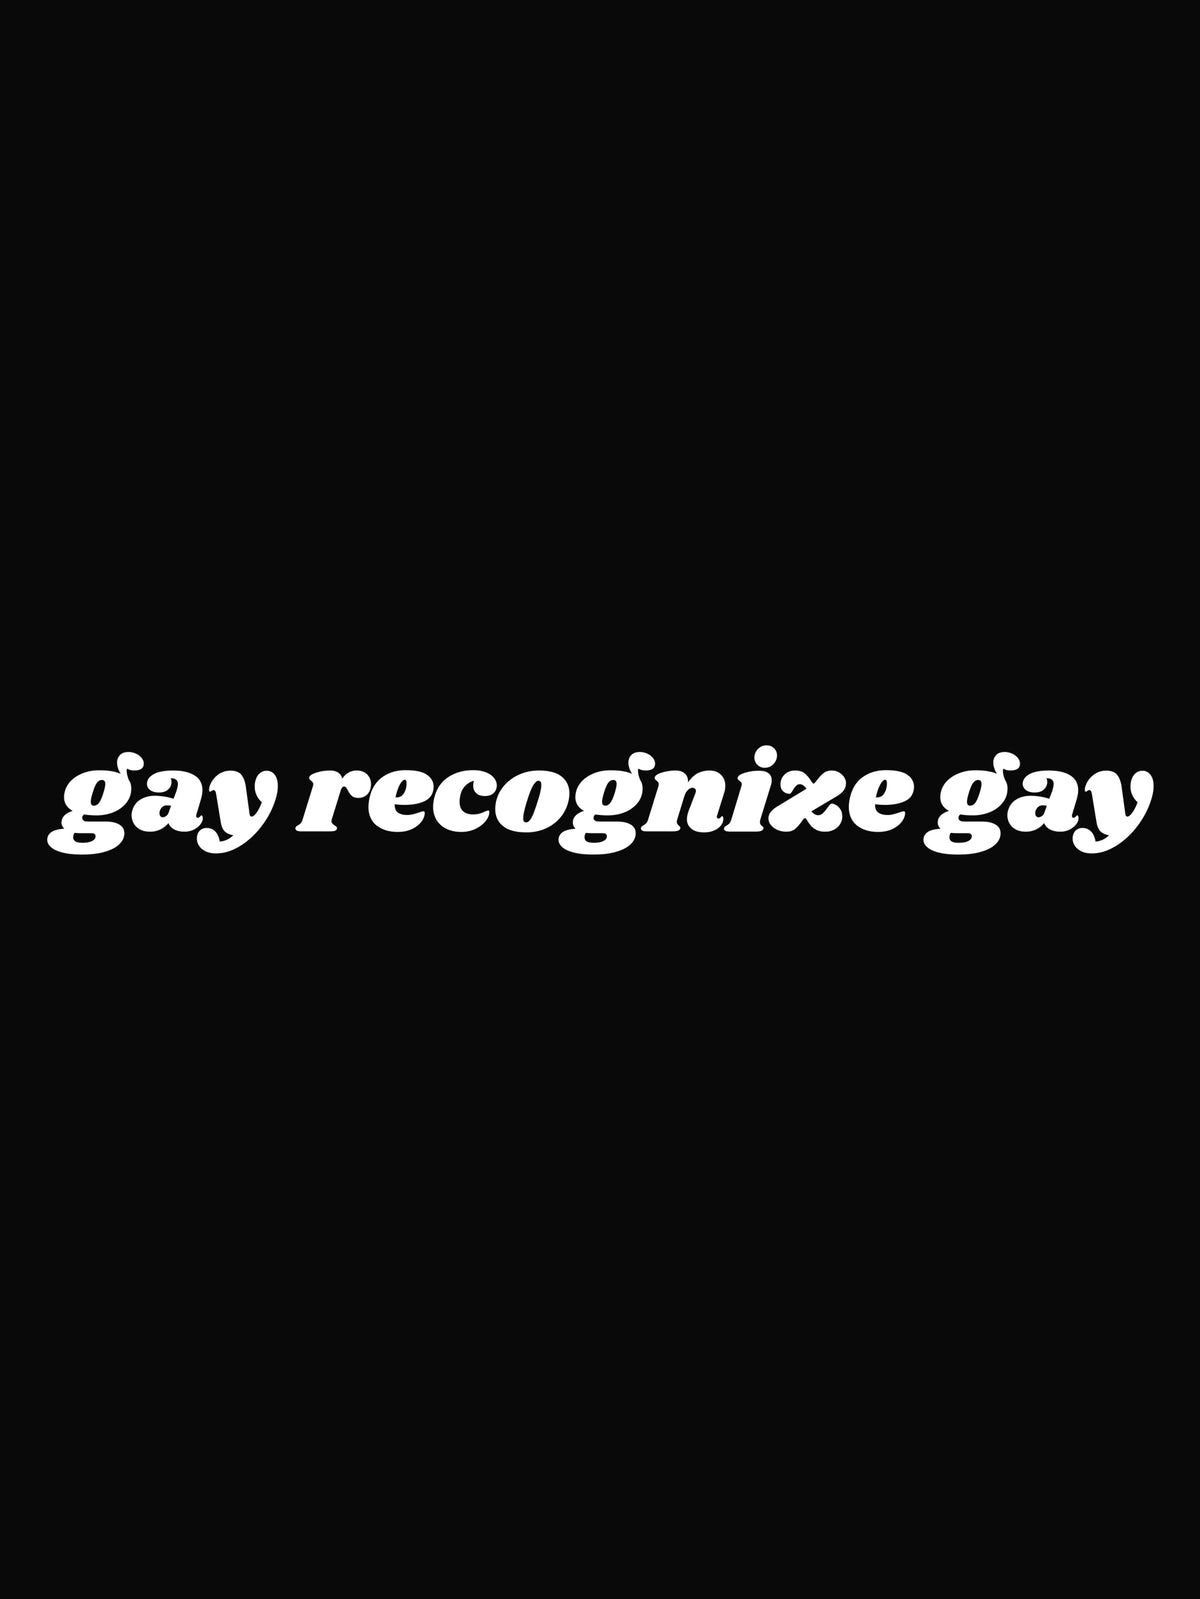 gay recognize gay by Dirty Laundry